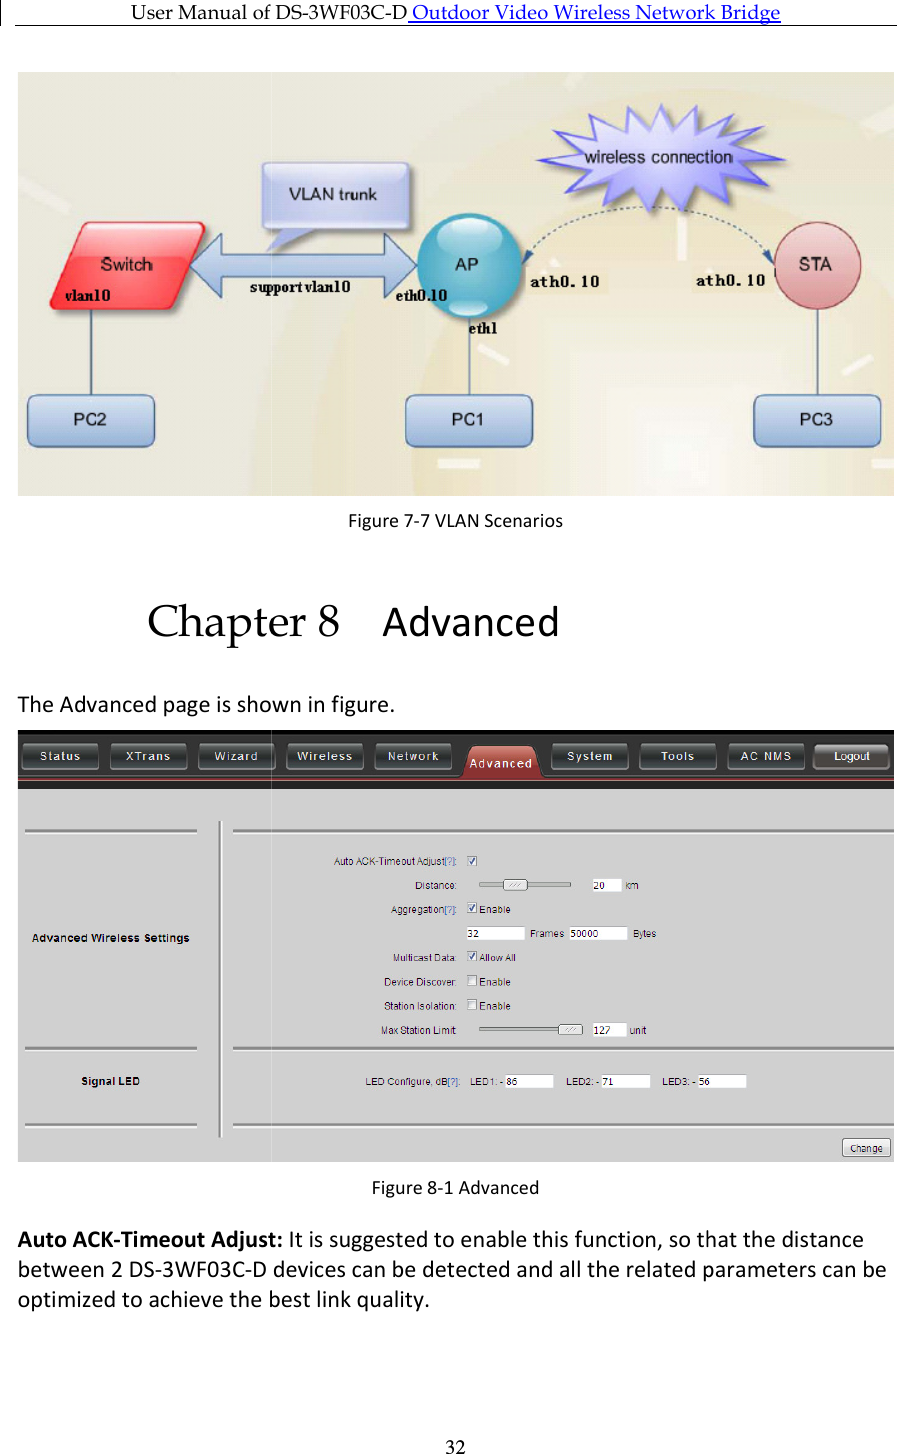 User Manual of  Chapter 8The Advanced page is shown in Auto ACK-Timeout Adjust:between 2 DS-3WF03C-D optimized to achieve the best link quality.User Manual of DS-3WF03C-D Outdoor Video Wireless Network   32Figure 7-7 VLAN Scenarios Chapter 8 Advanced The Advanced page is shown in figure. Figure 8-1 Advanced Timeout Adjust: It is suggested to enable this function, so that the distance  devices can be detected and all the related parameters can be optimized to achieve the best link quality. Outdoor Video Wireless Network Bridge   It is suggested to enable this function, so that the distance devices can be detected and all the related parameters can be 